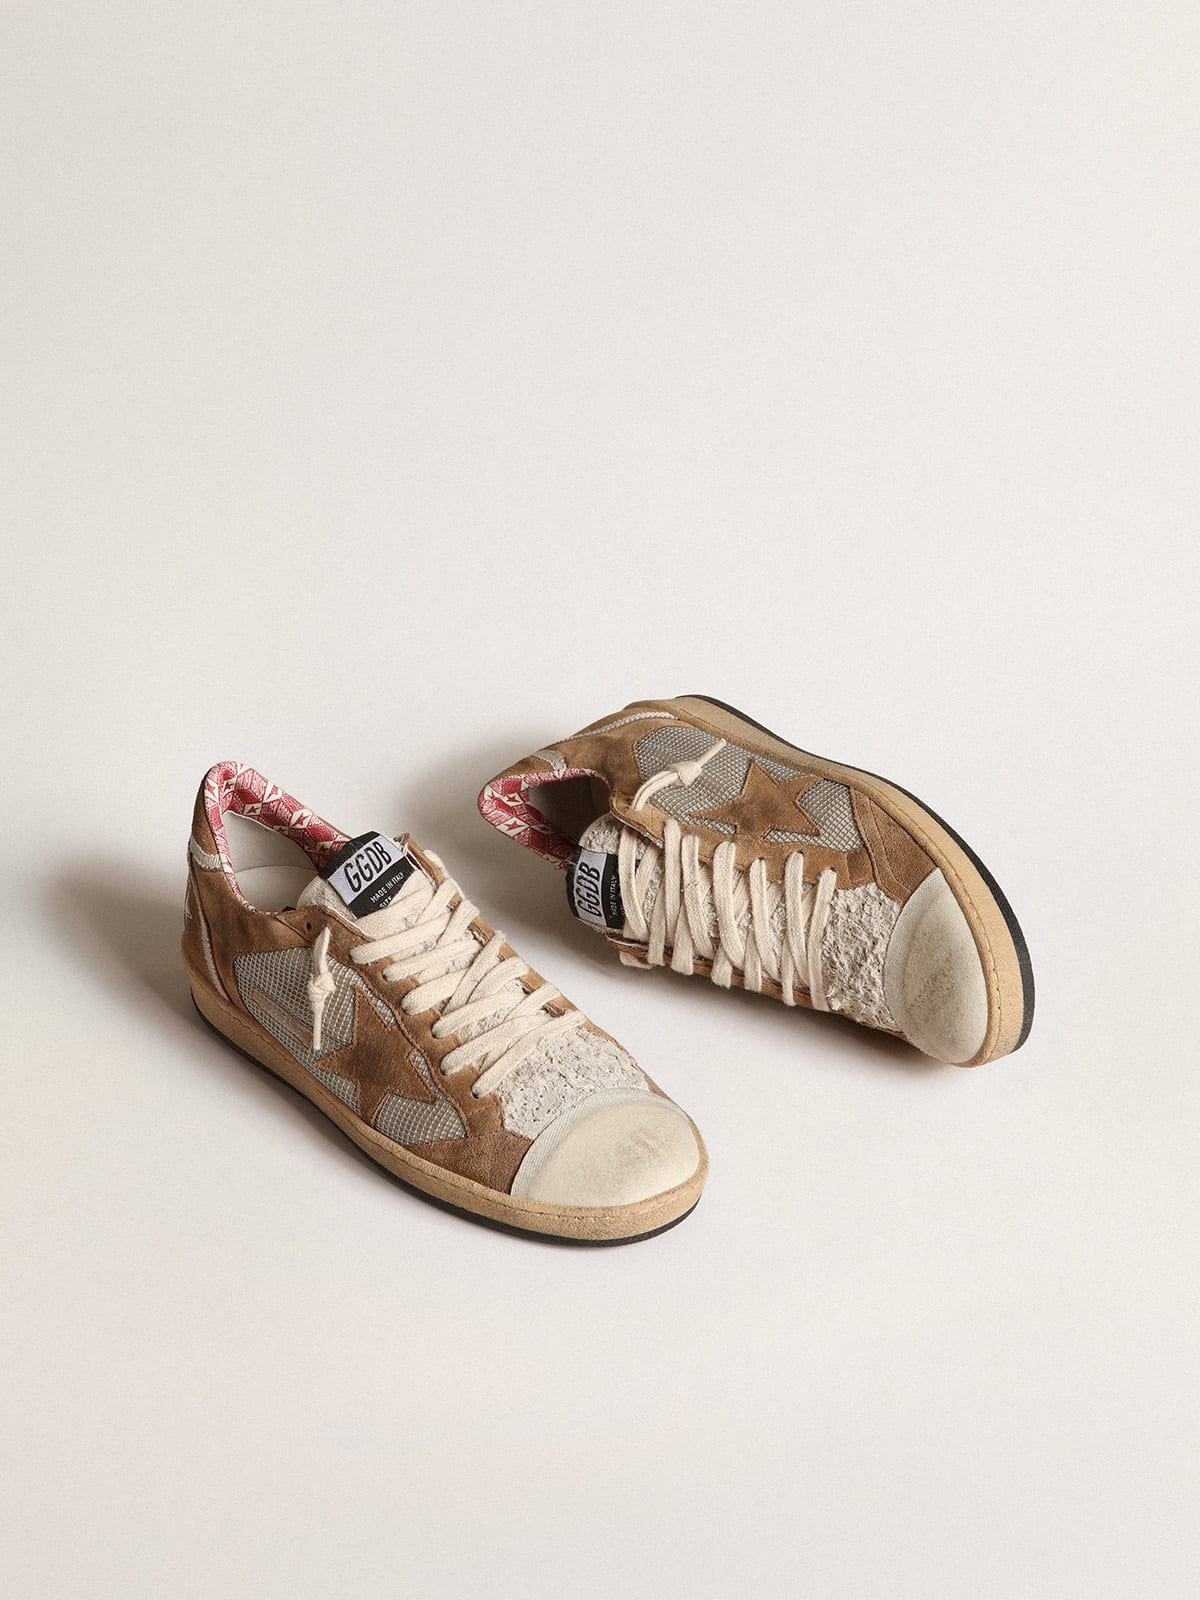 Golden Goose - Women's Ball Star LAB in buff-colored suede  in 